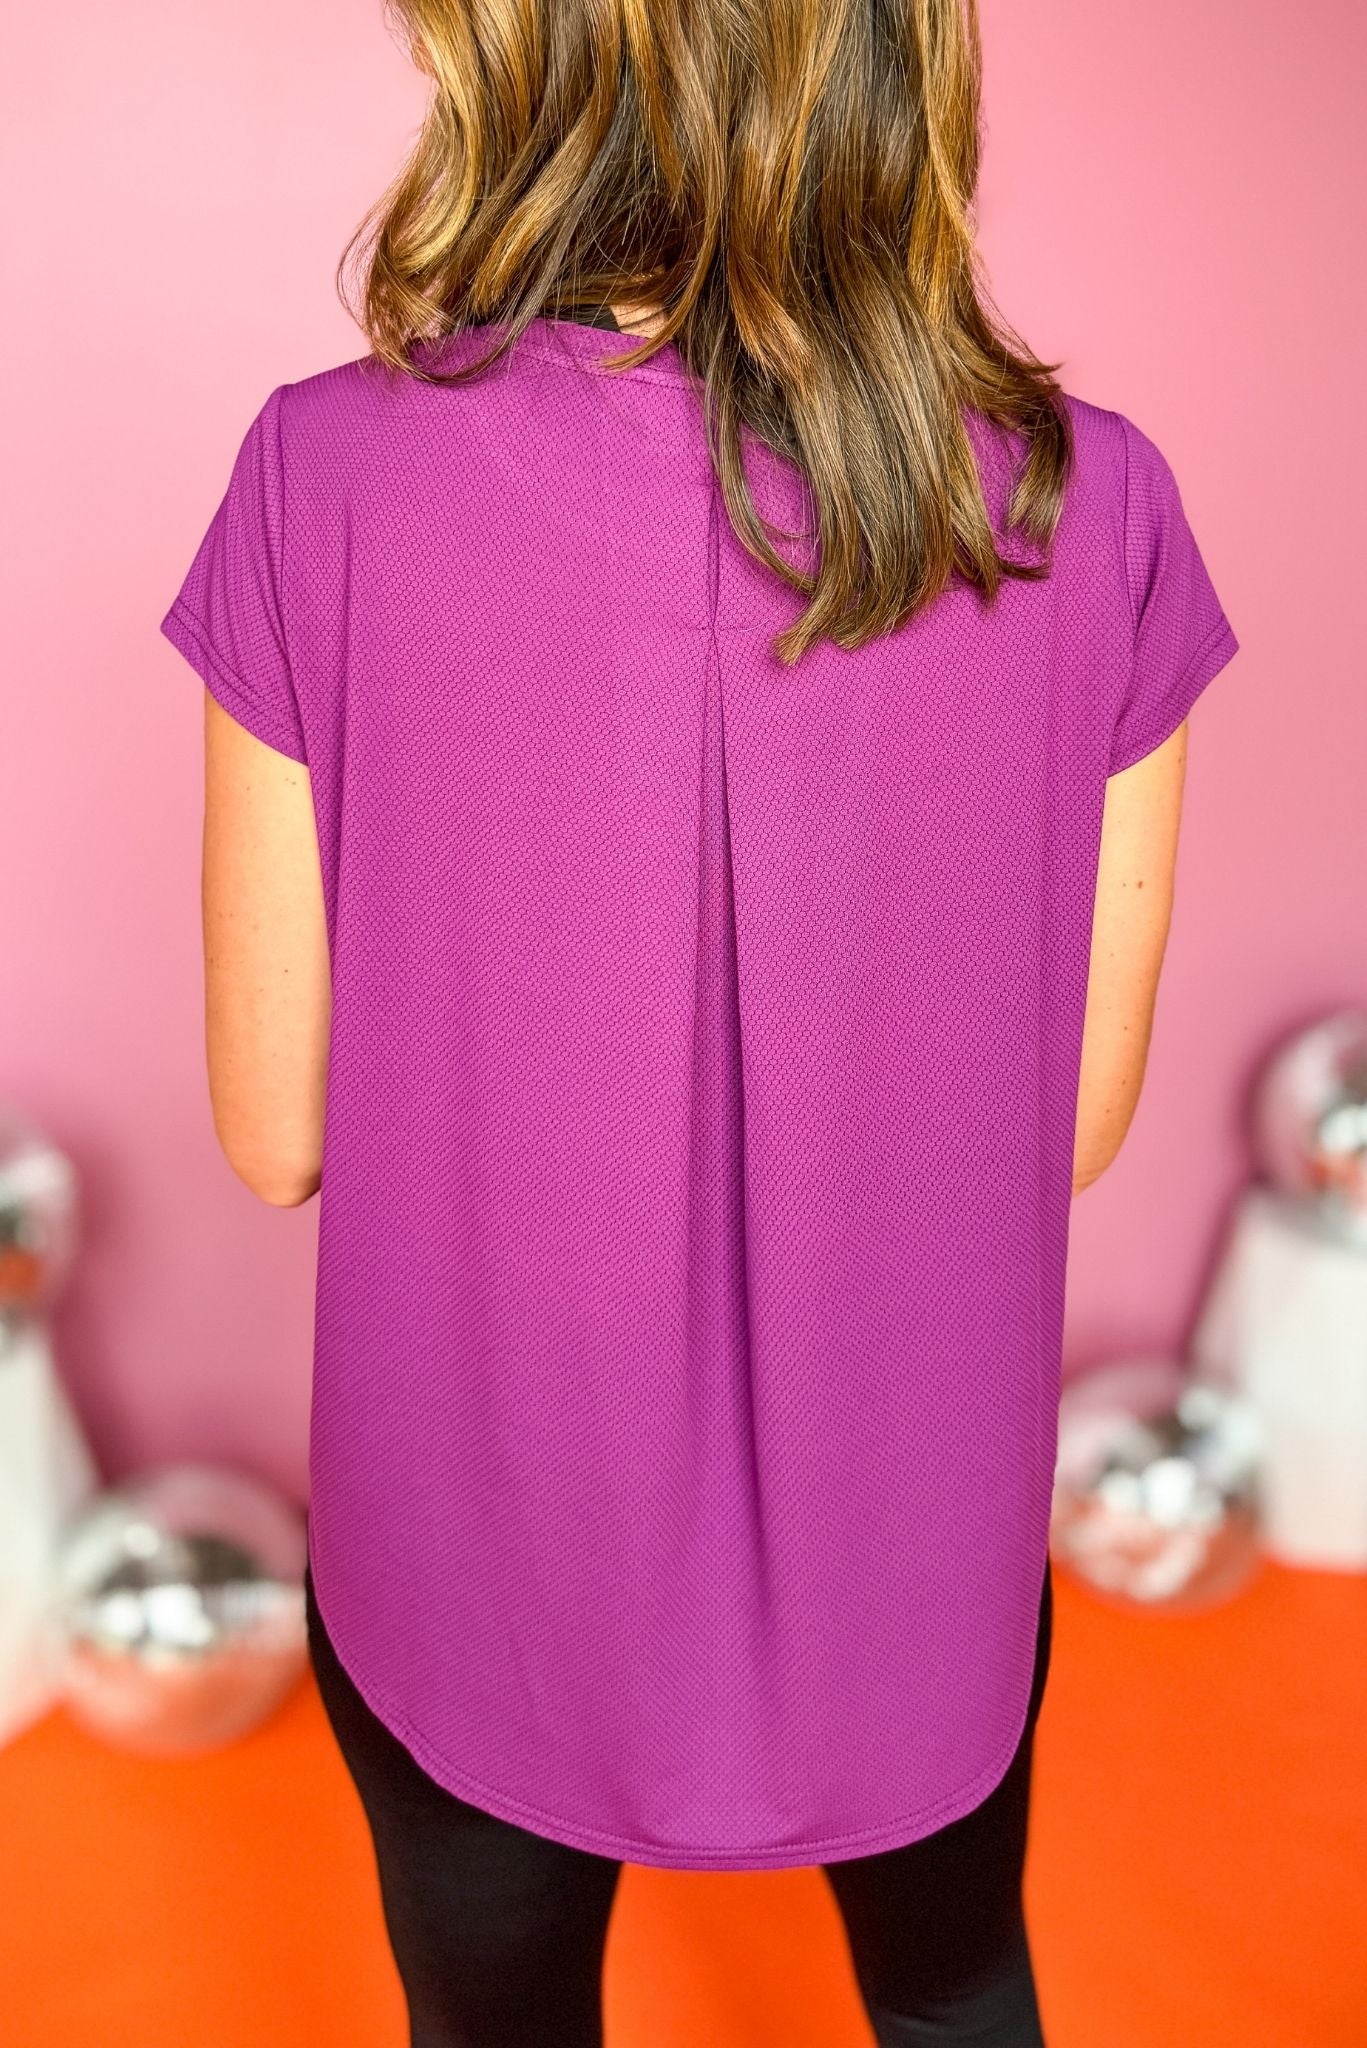 SSYS Purple Honeycomb Short Sleeve Active Top,  ssys the label, athleisure, elevated athleisure, must have top, athletic top, bright top, athletic style, mom style, shop style your senses by mallory fitzsimmons, ssys by mallory fitzsimmons